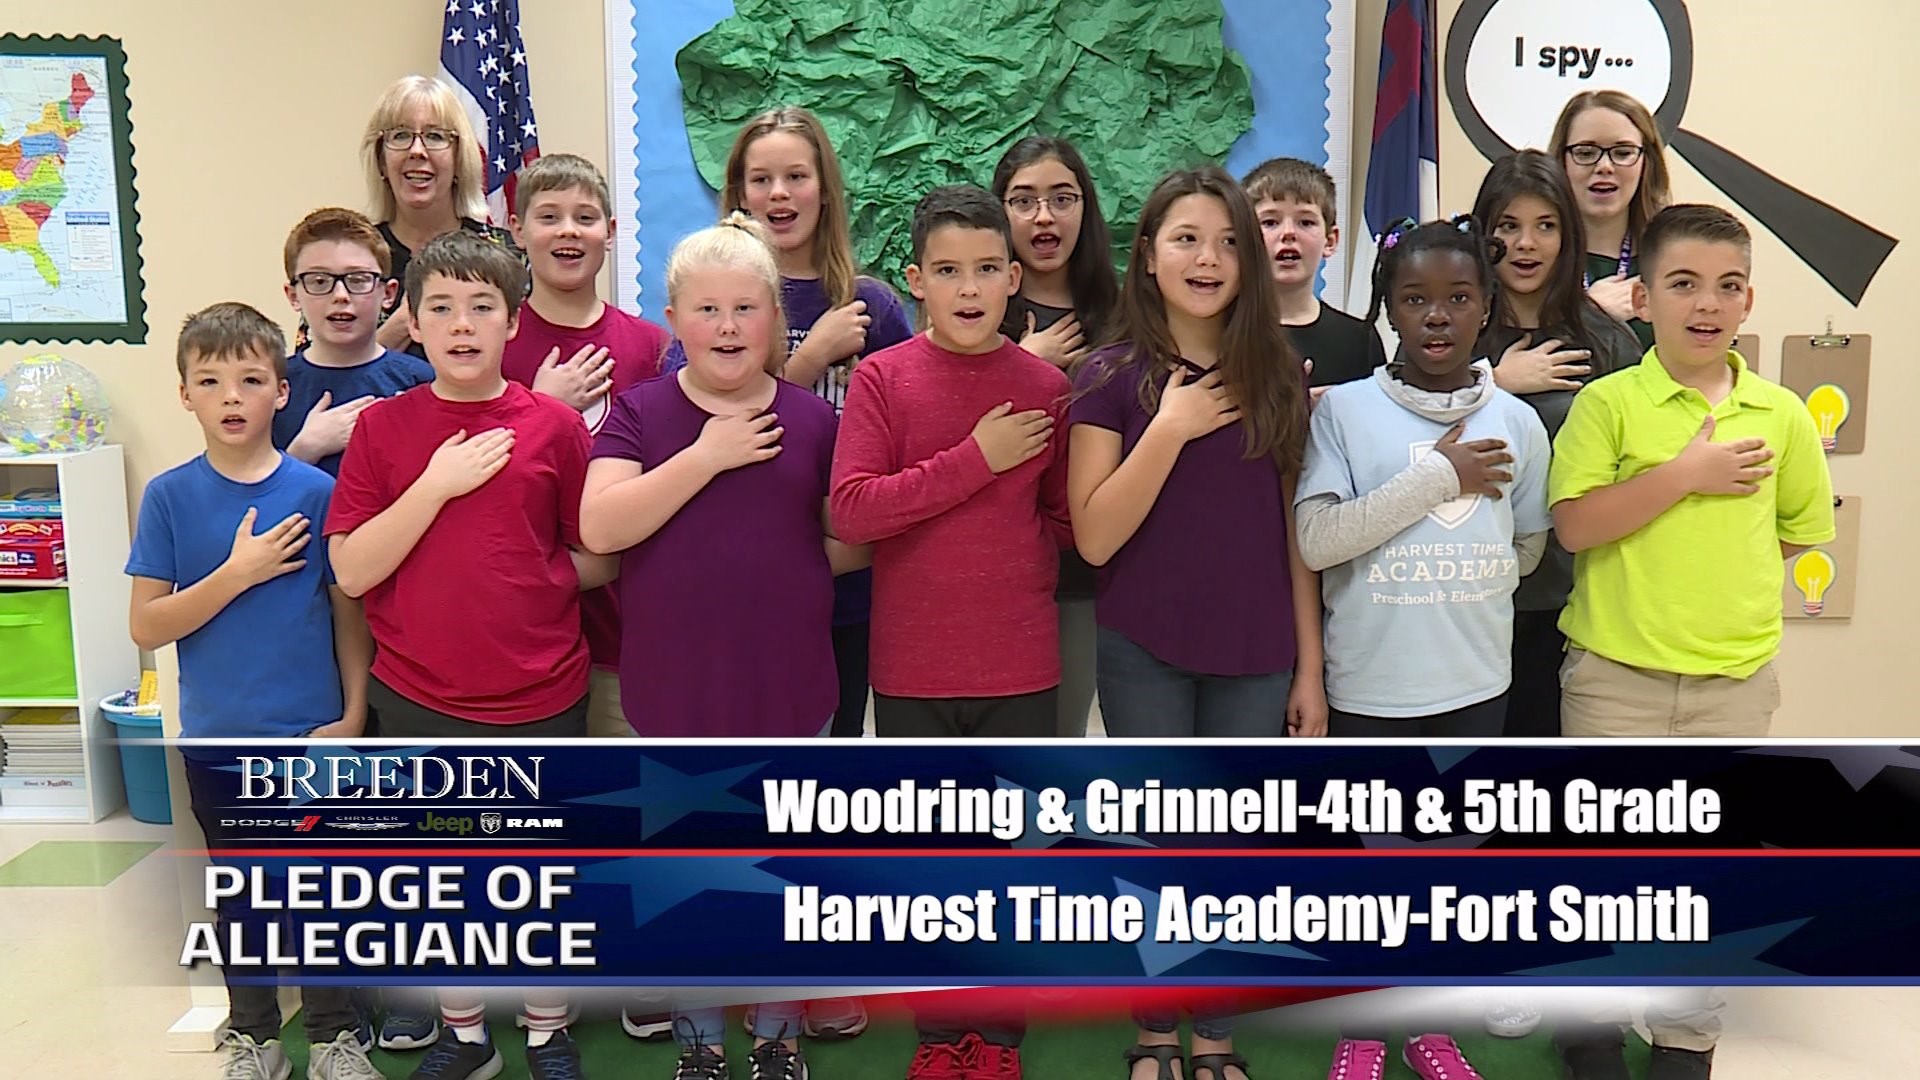 Woodring & Grinnell  4th & 5th Grade Harvest Time Academy, Fort Smith